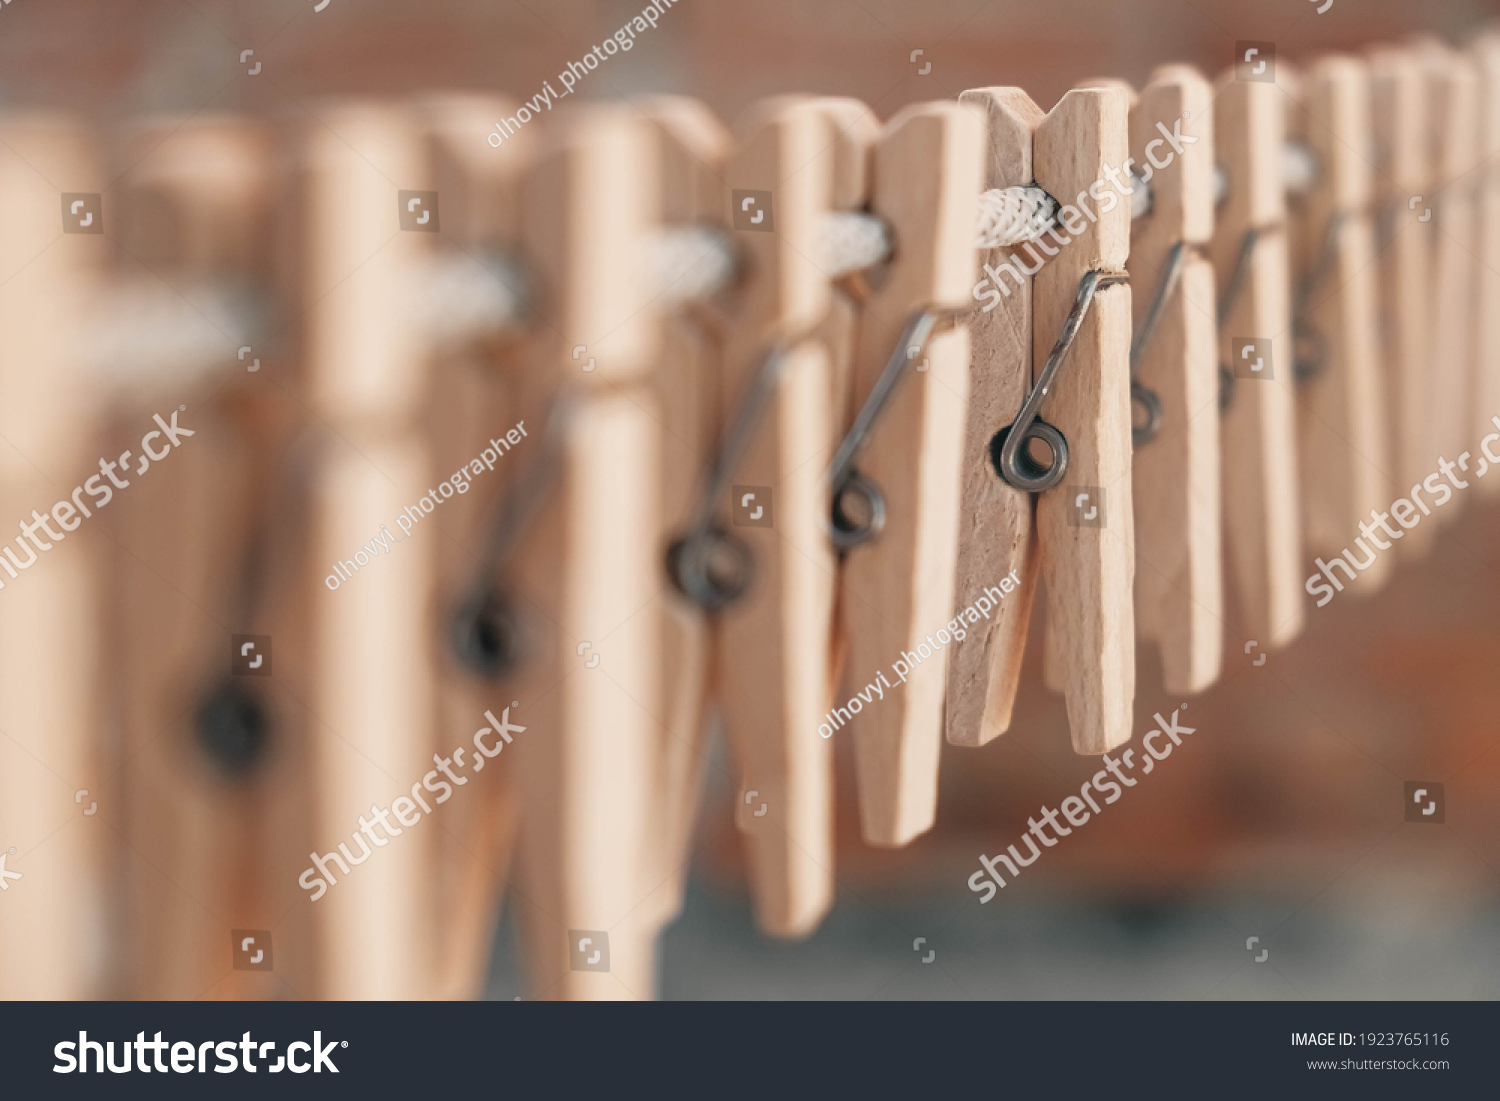 Wooden clothespins on a rope. Selective focus on one clothespin. Copy, empty space for text. #1923765116